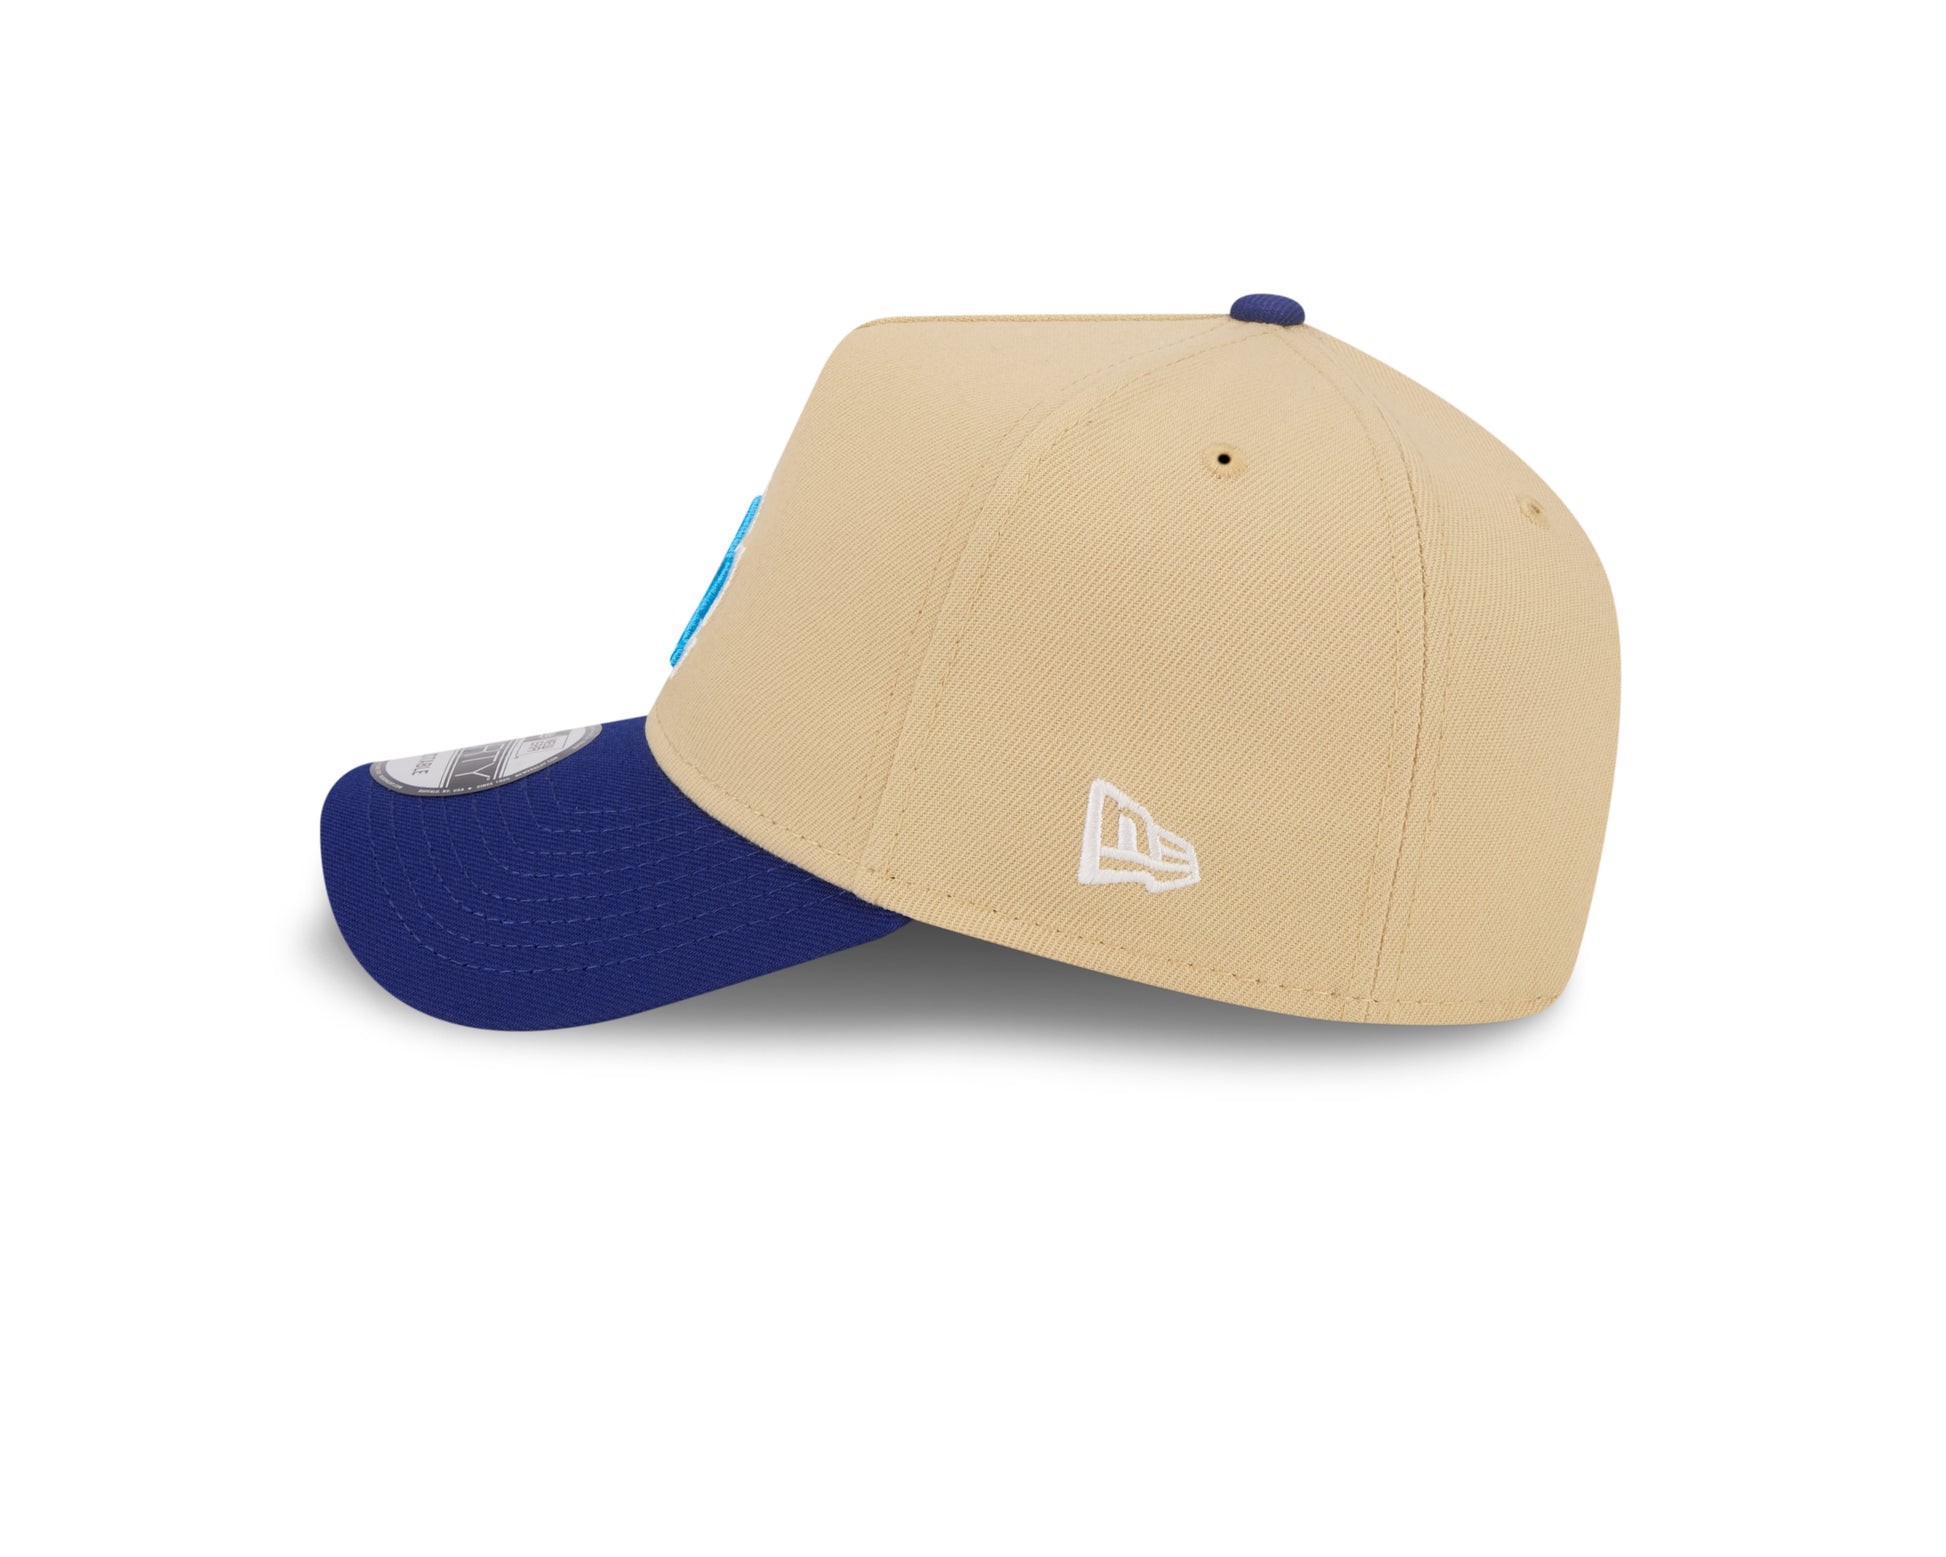 New Era - Los Angeles Dodgers - City Side Patch - 9forty A-Frame Cap - Light Beige - Headz Up 